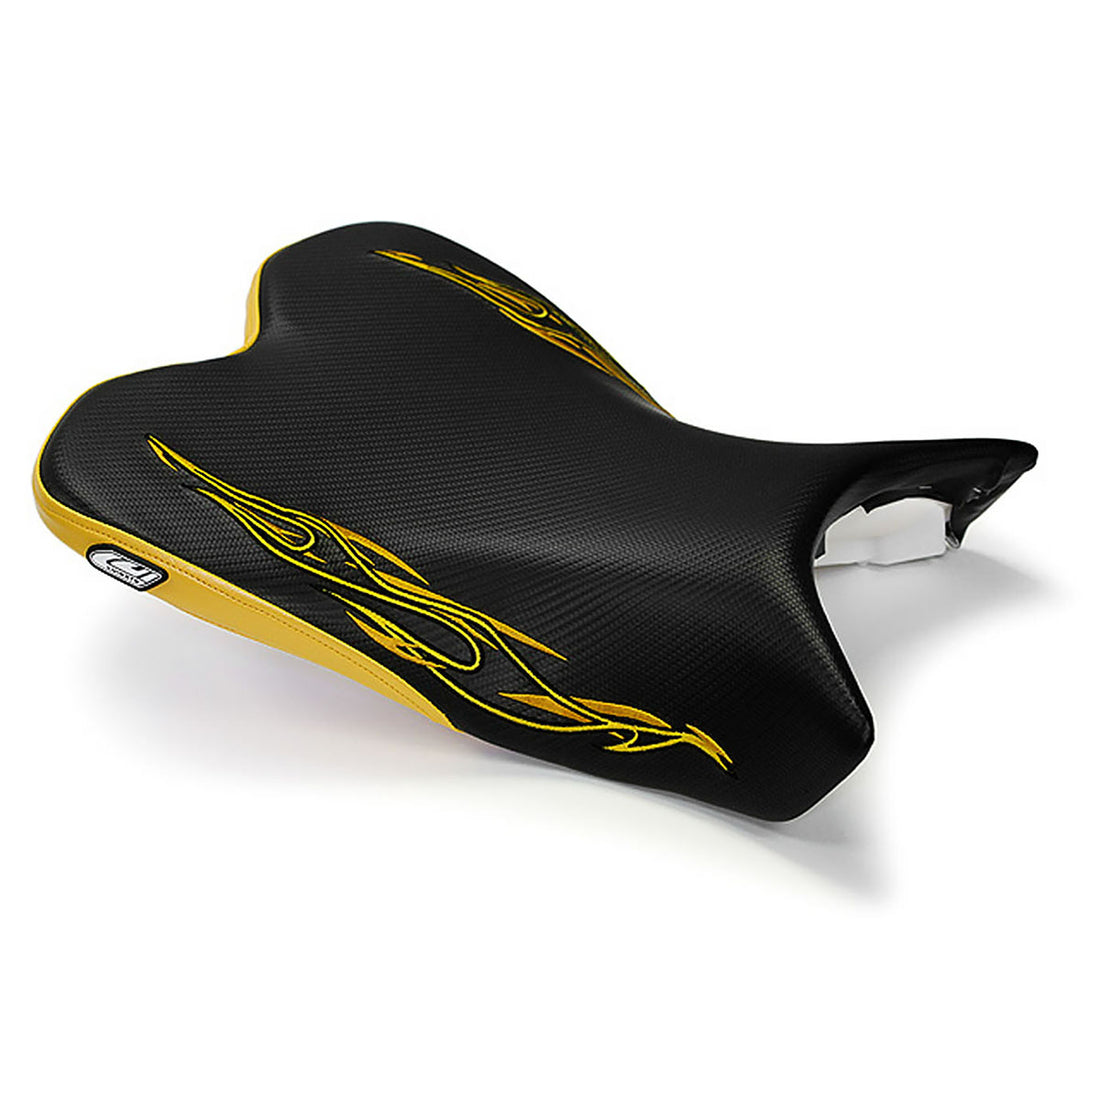 Yamaha | R1 09-14 | Flame | Rider Seat Cover